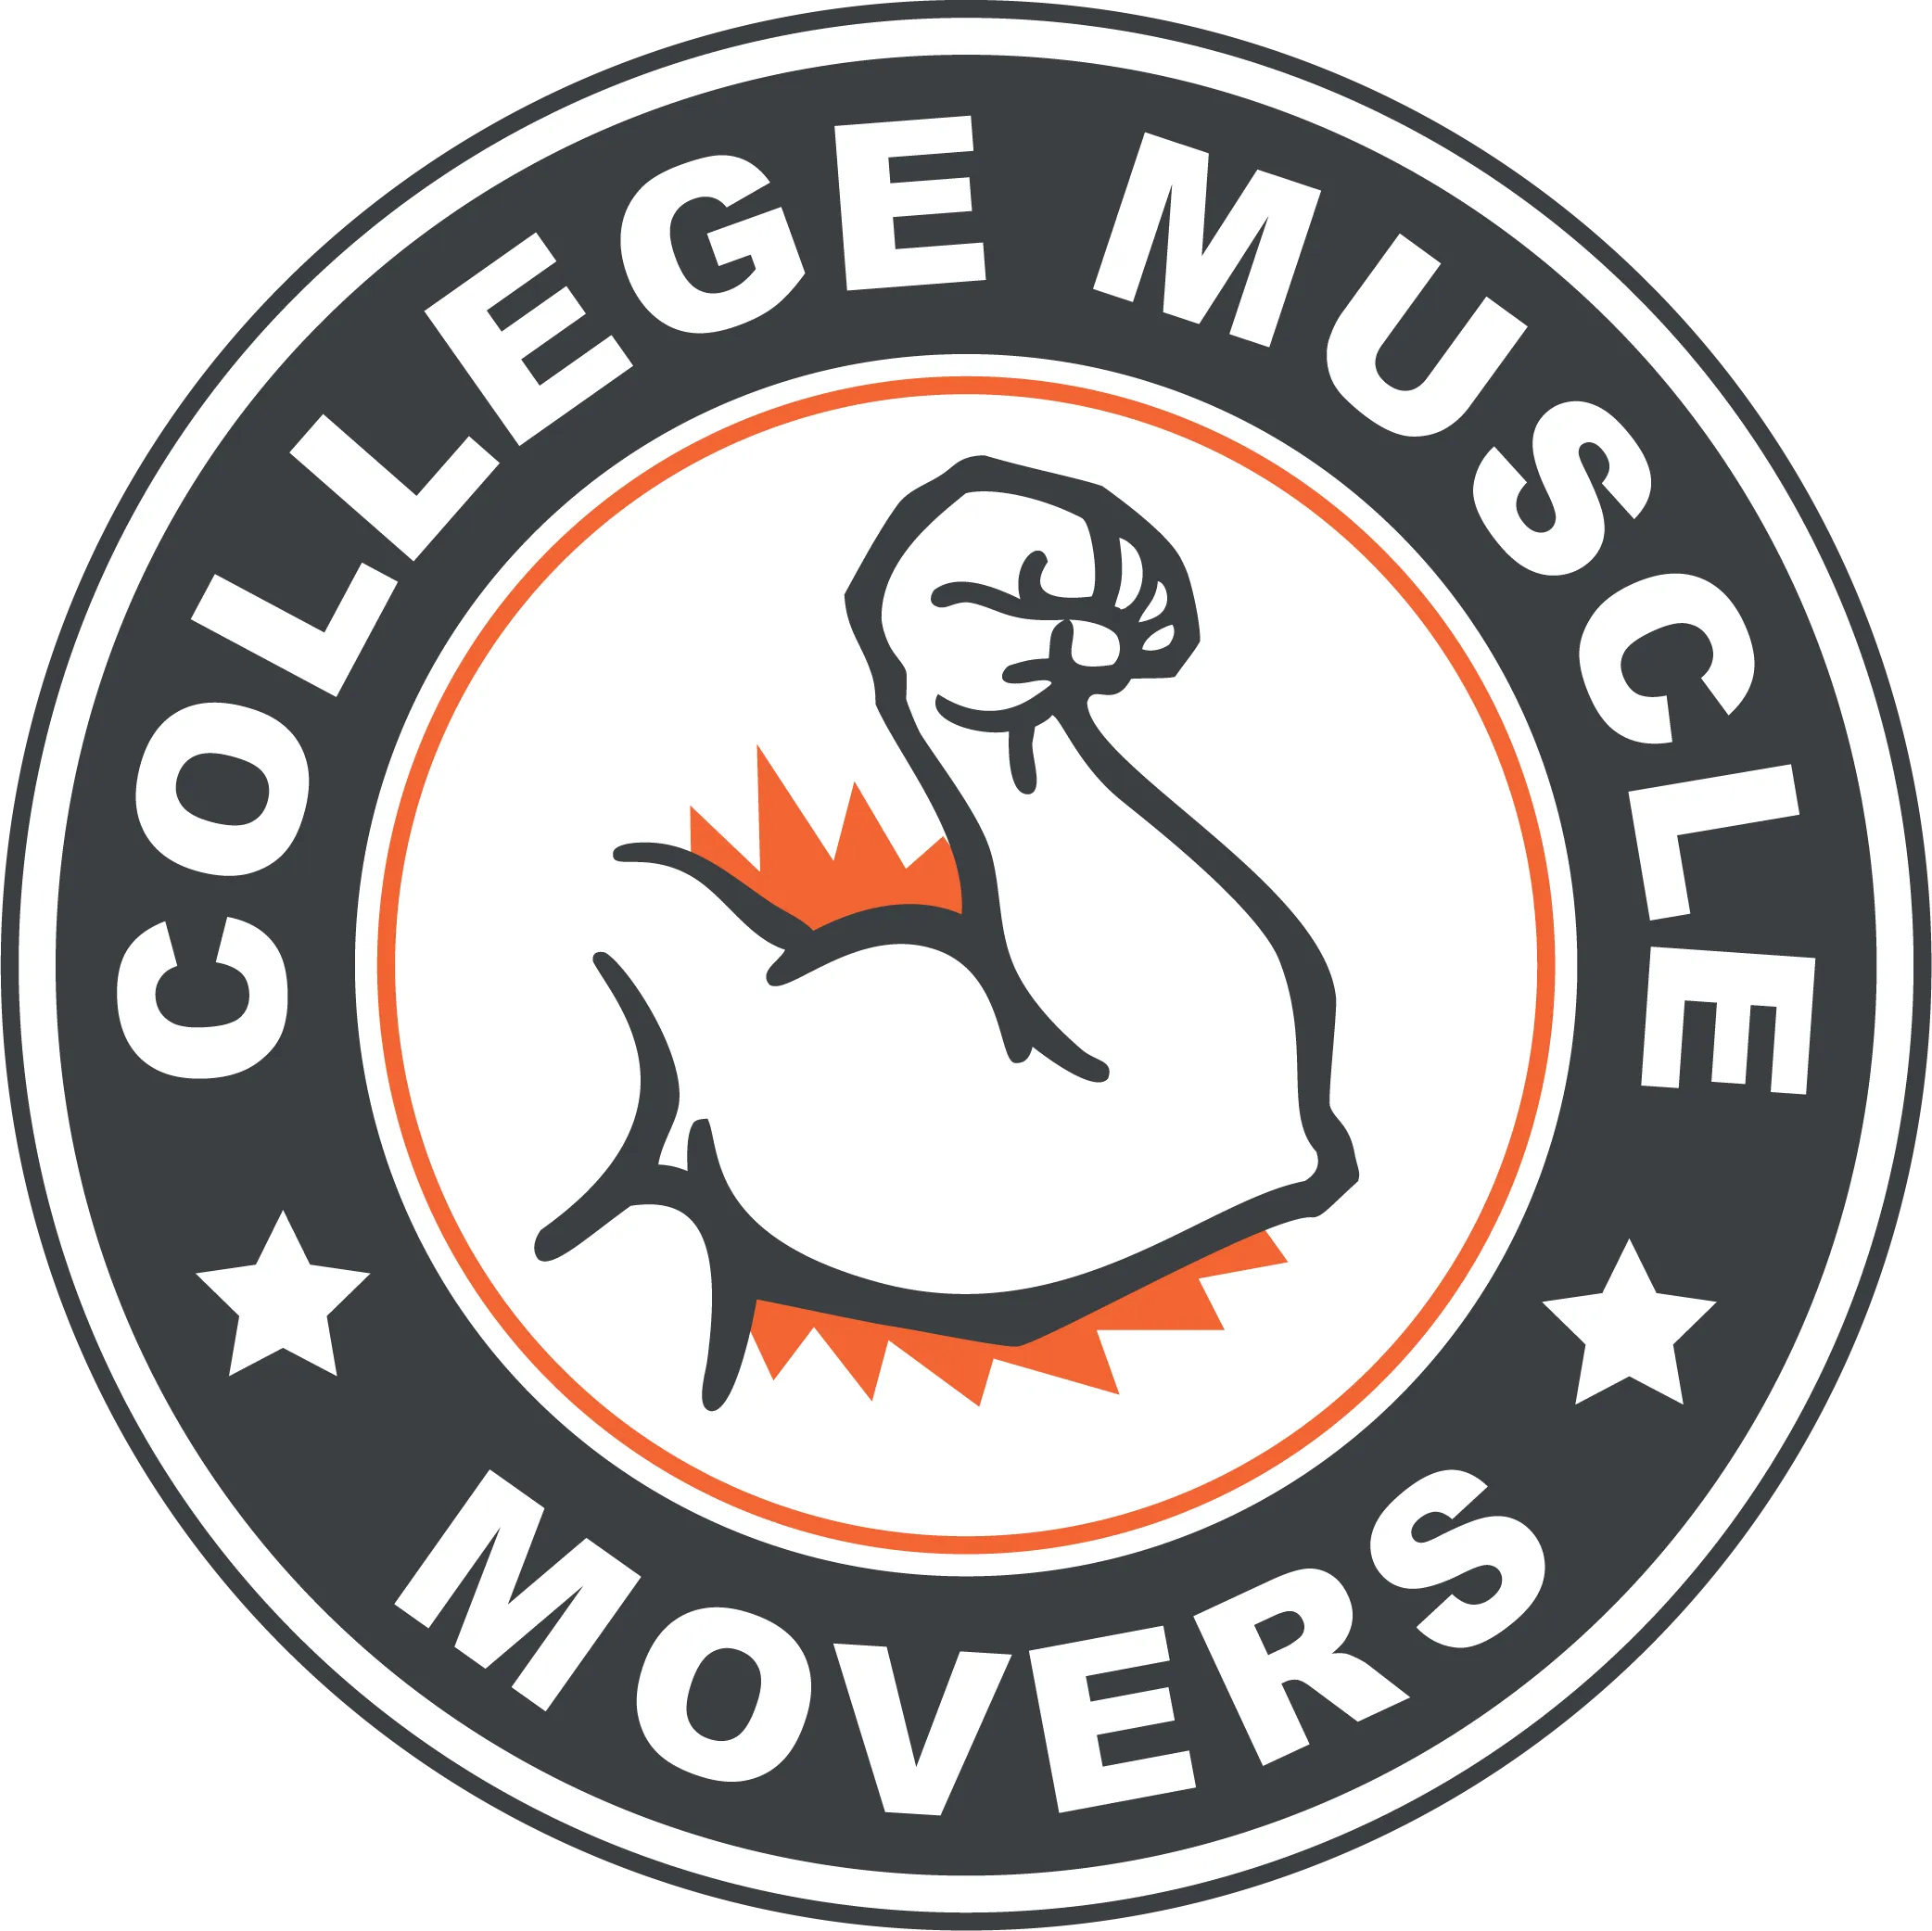 College Muscle Movers logo